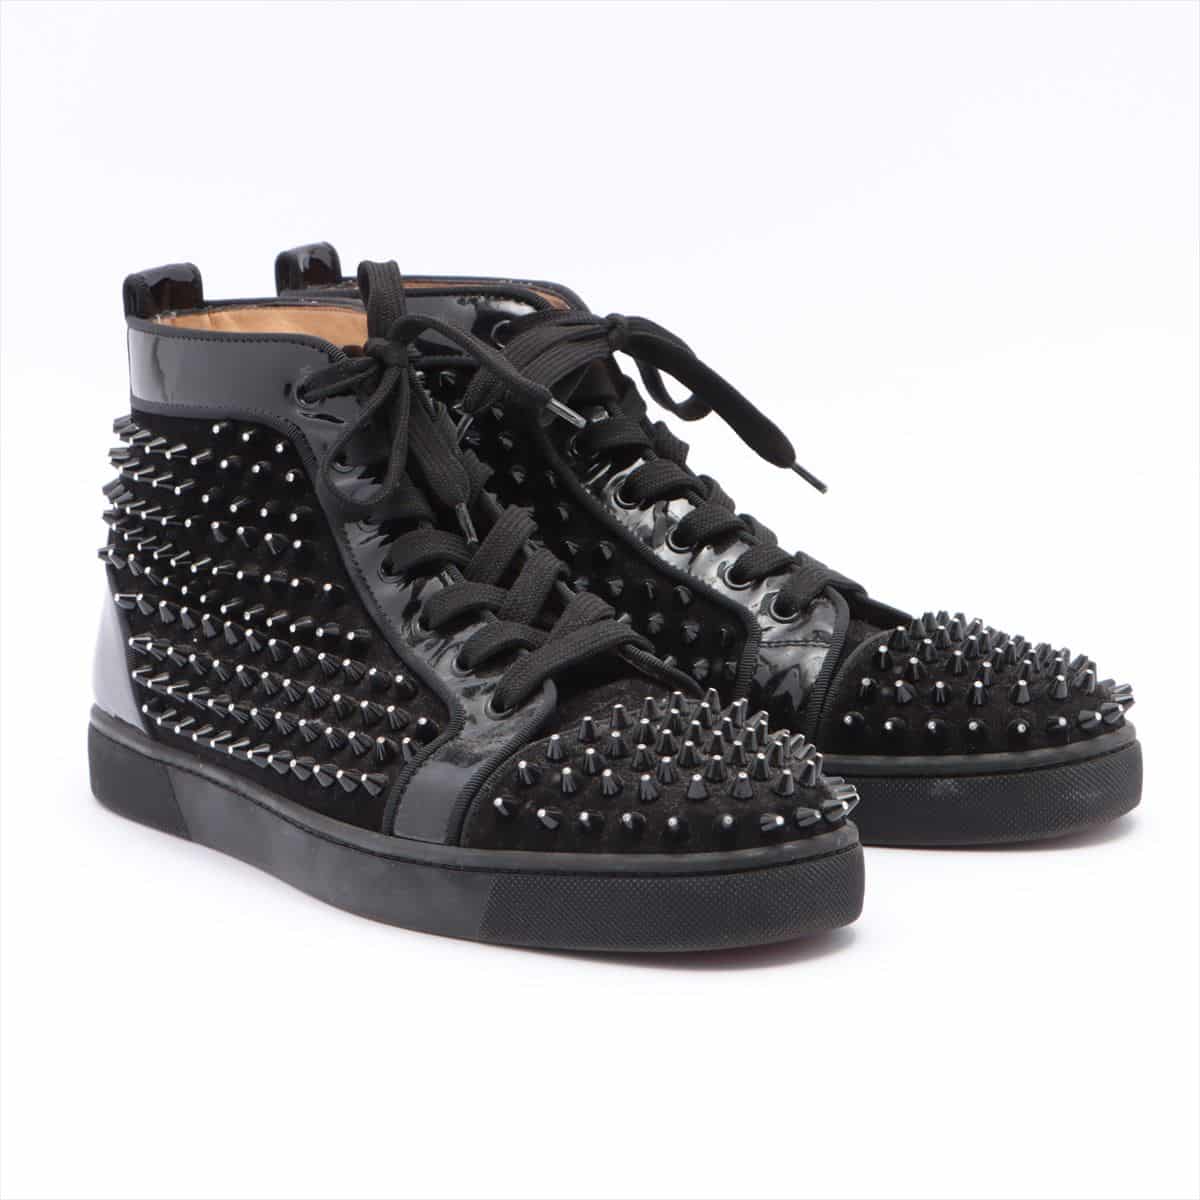 Christian Louboutin Suede High-top Sneakers 43 Men's Black Studs